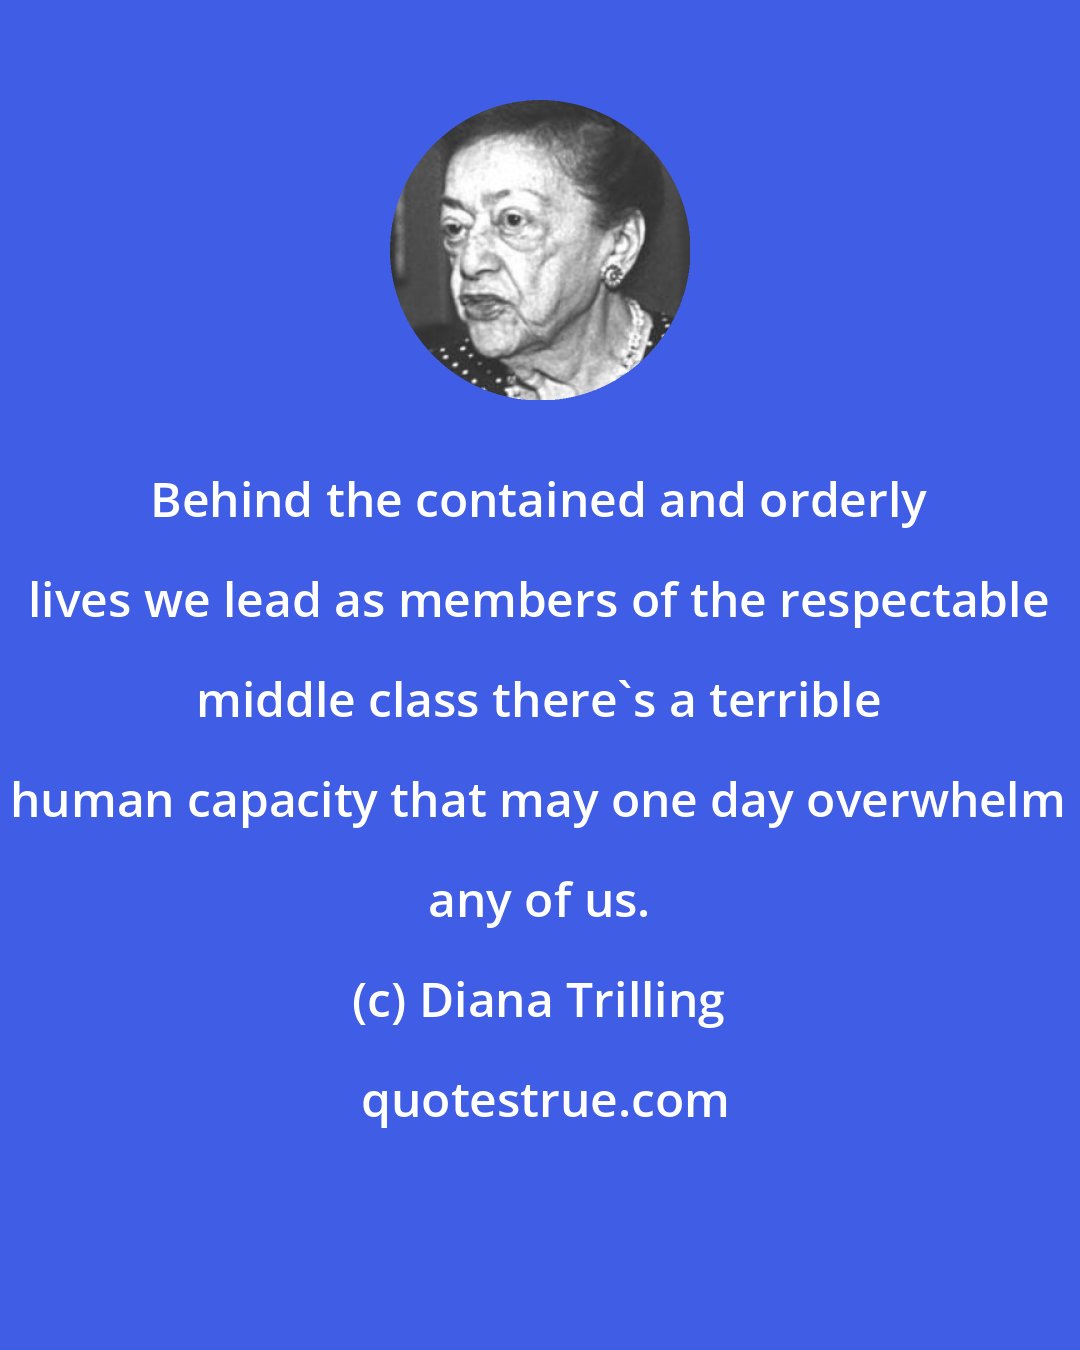 Diana Trilling: Behind the contained and orderly lives we lead as members of the respectable middle class there's a terrible human capacity that may one day overwhelm any of us.